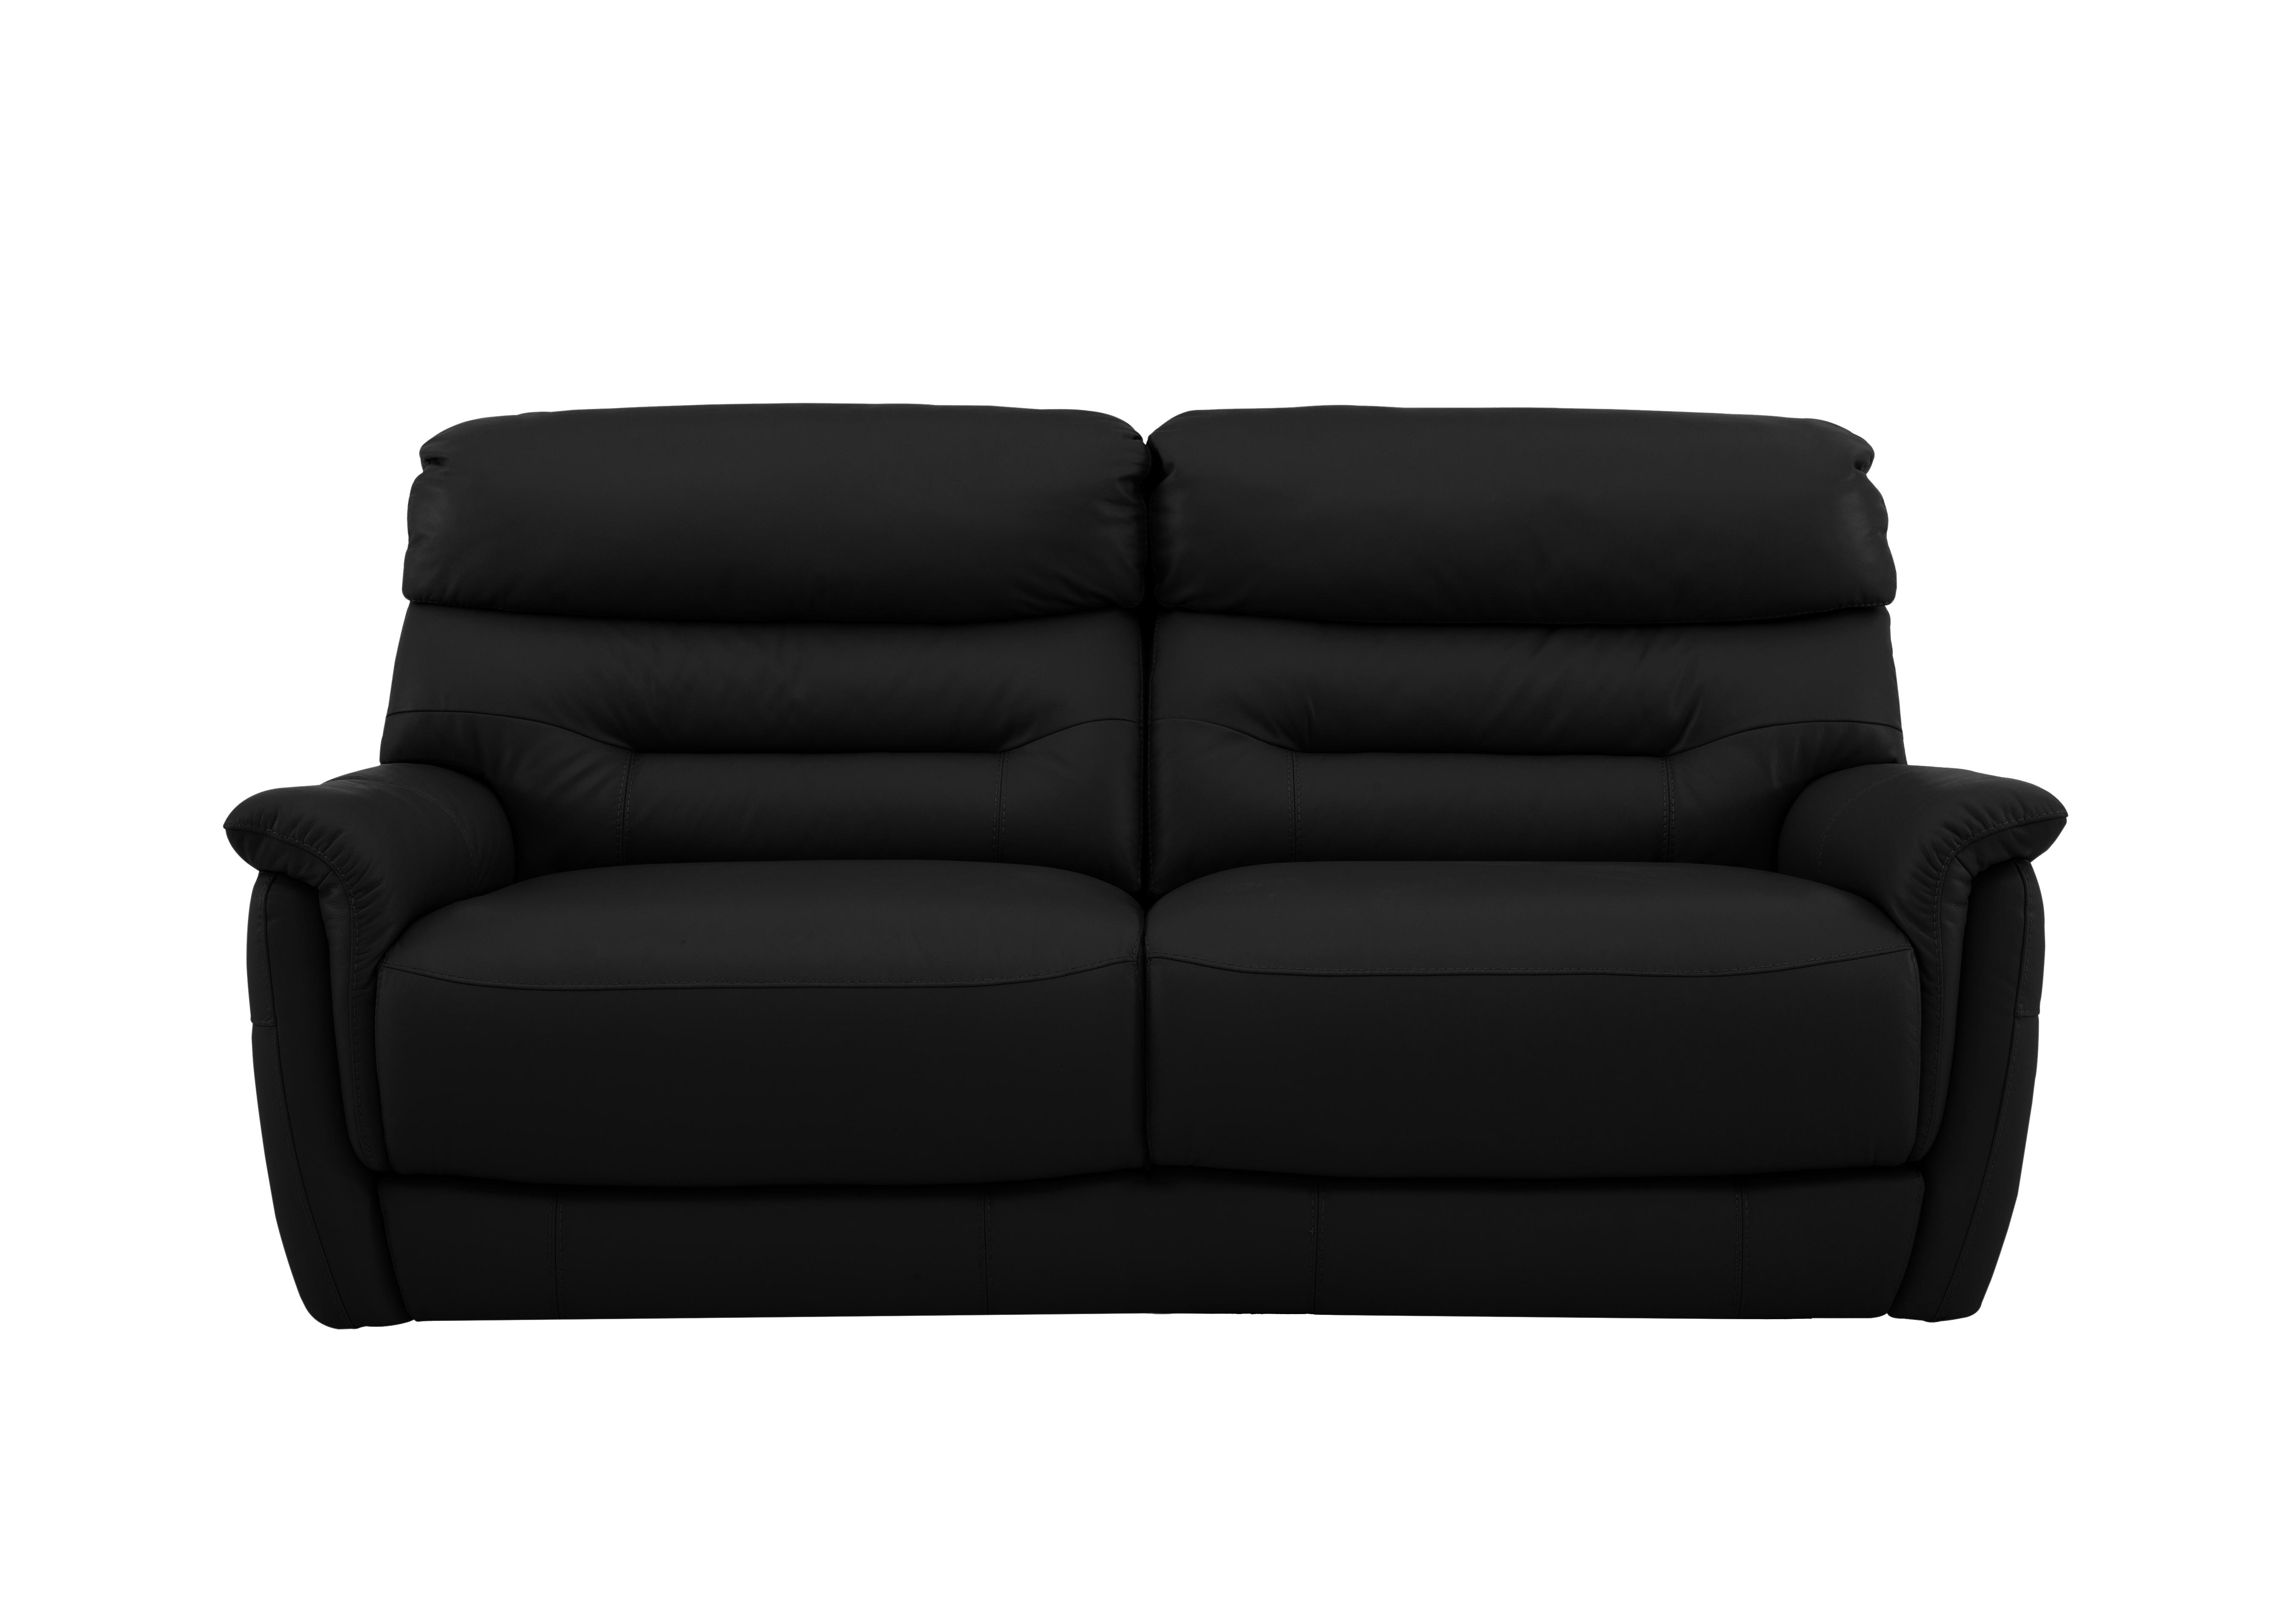 Chicago 3 Seater Leather Sofa in An-671b Black on Furniture Village